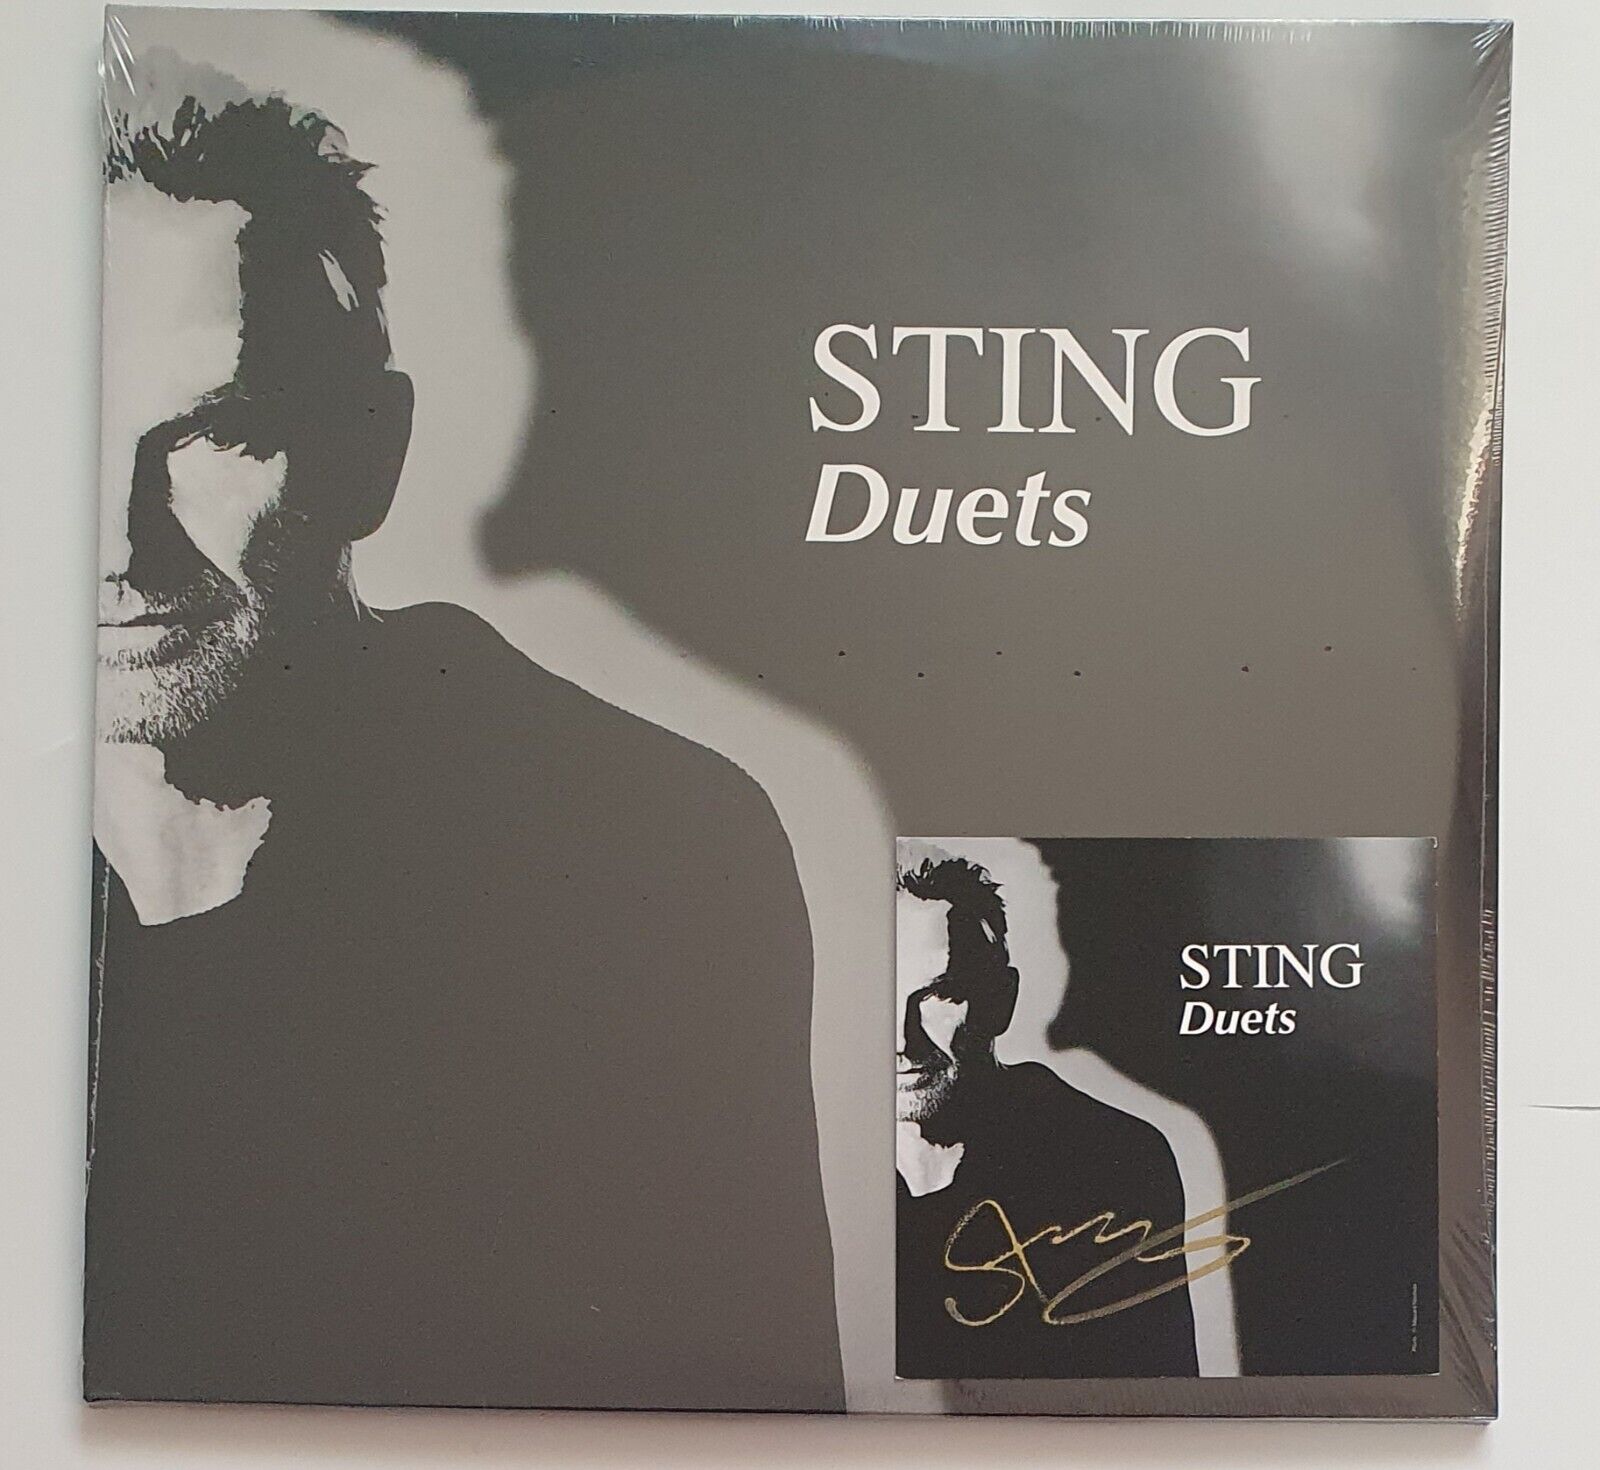 Sting Duets Gatefold Double 12" Vinyl LP 2021 LTD SIGNED ART CARD NEW SOLD OUT!